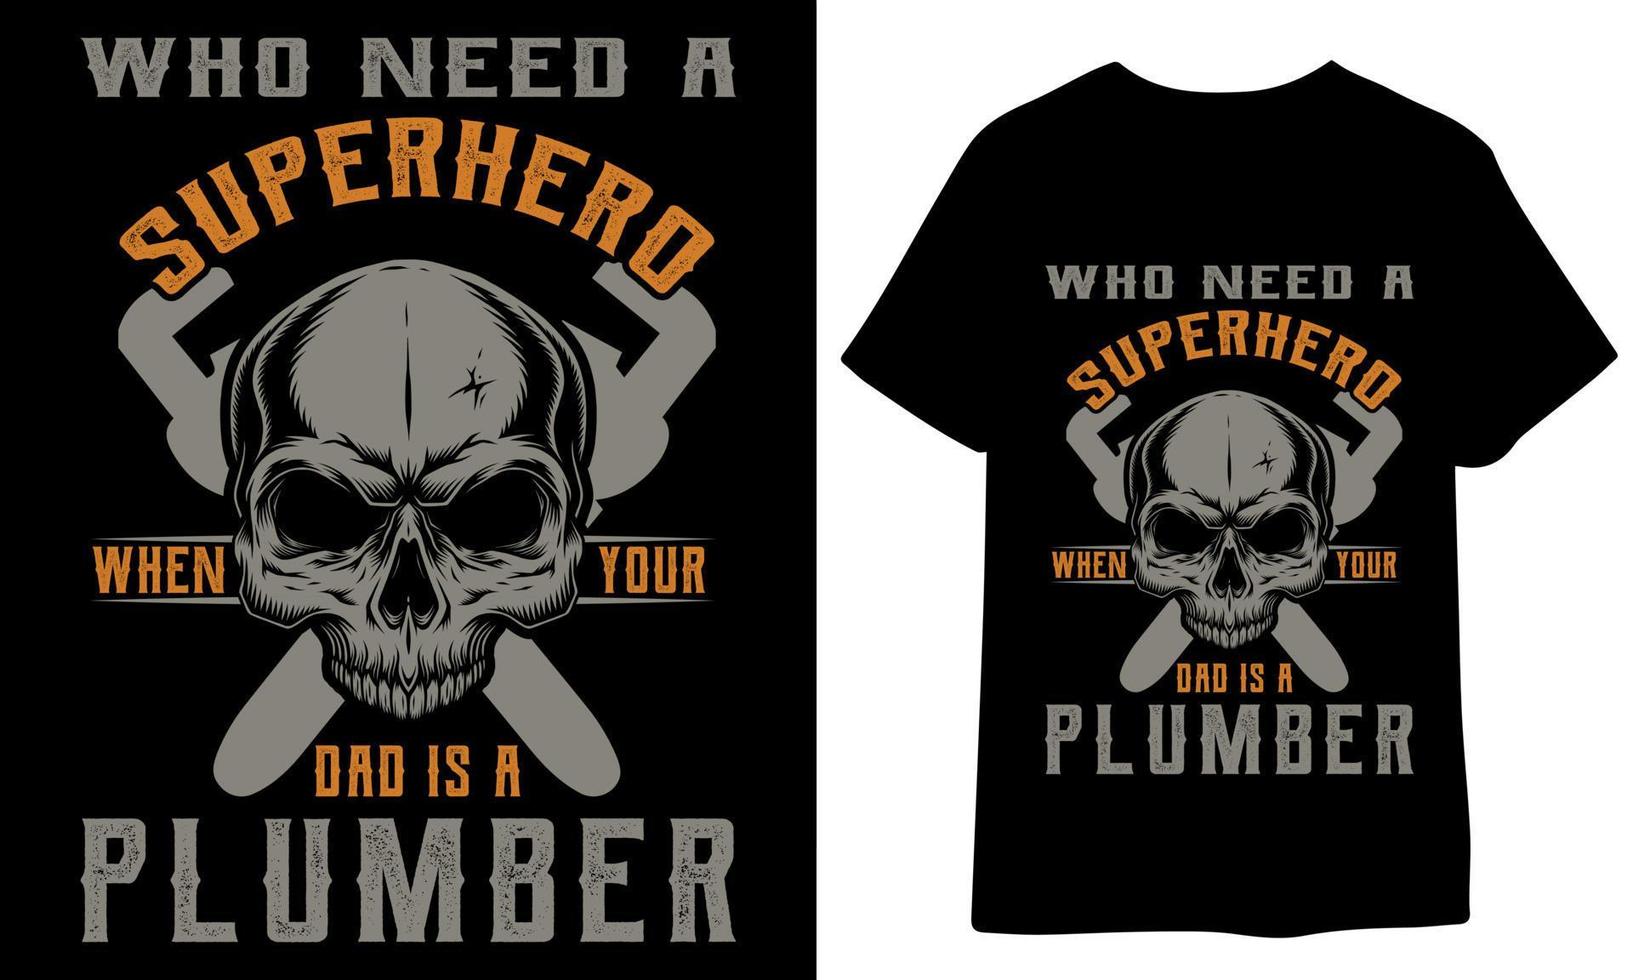 Who need a superhero when your dad is a plumber. plumber t shirt design. plumber vector